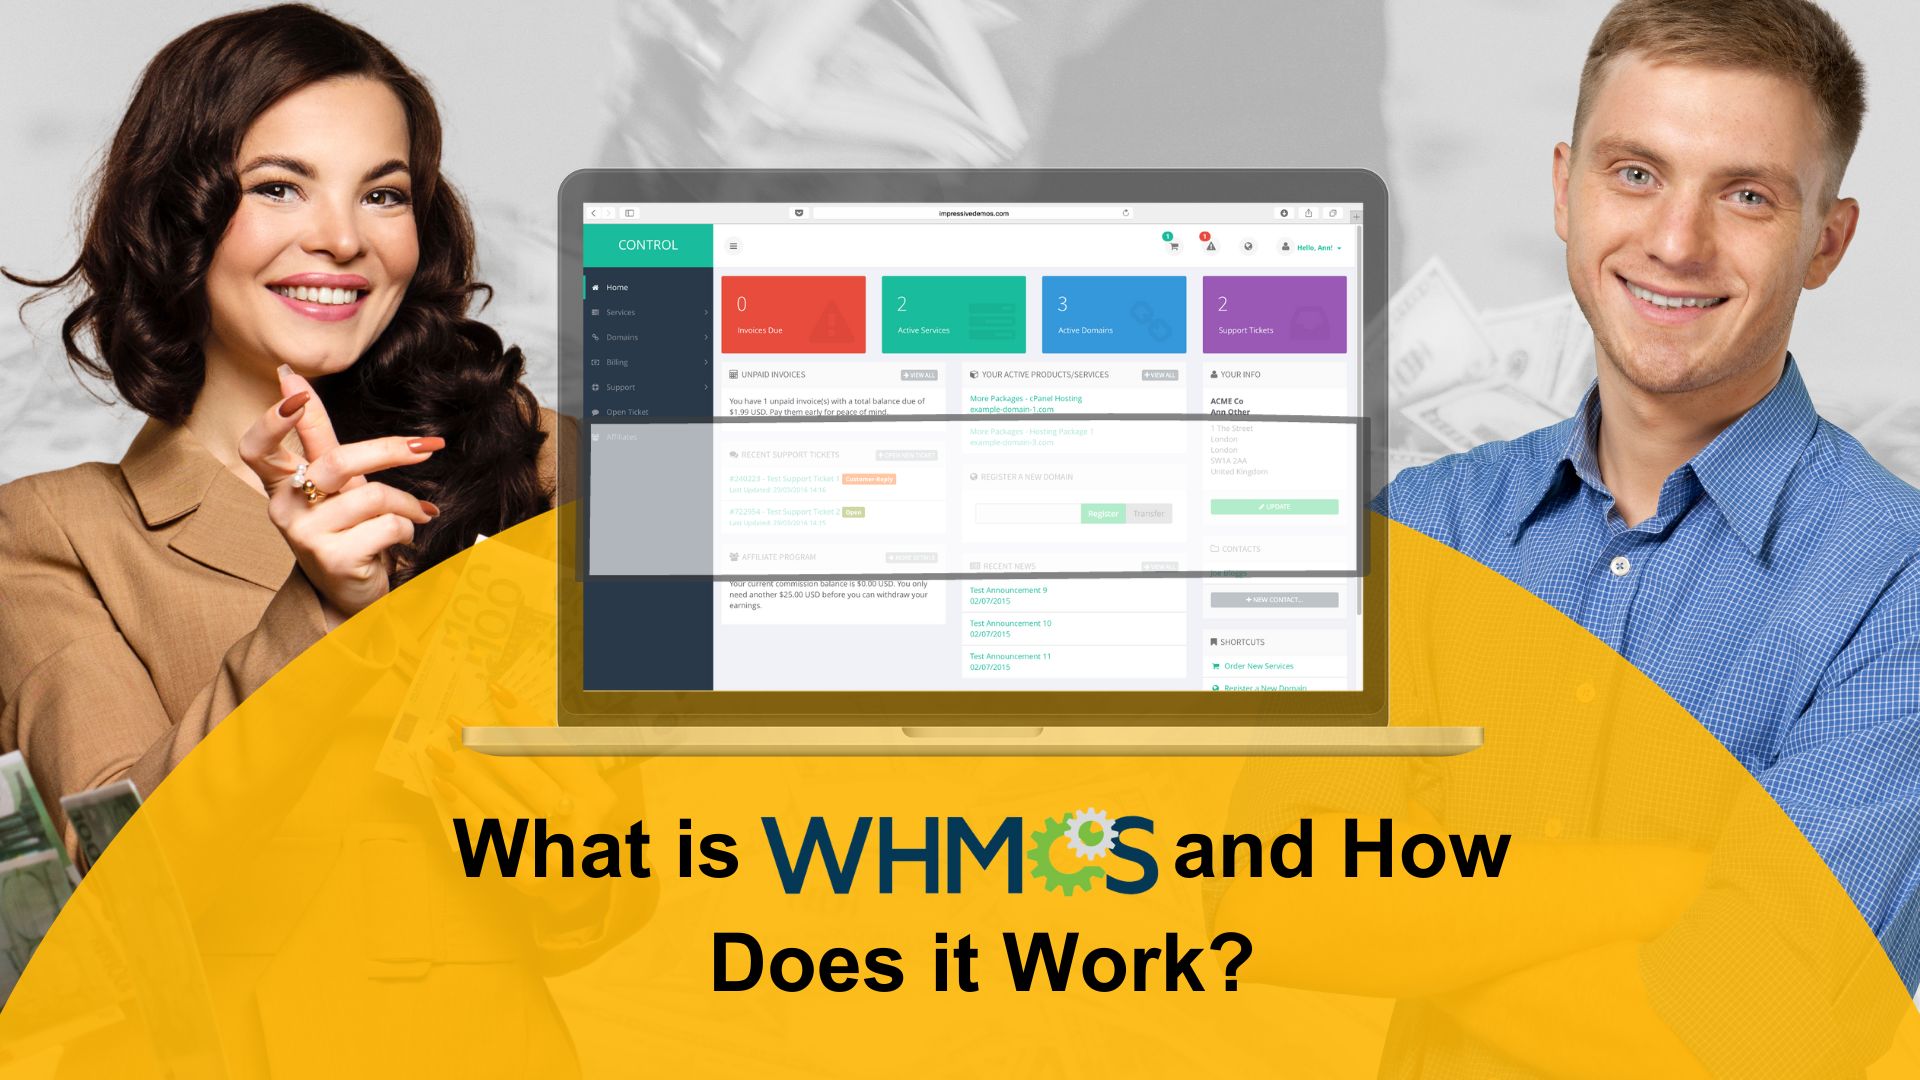 What is WHMCS and How Does it Work (2)